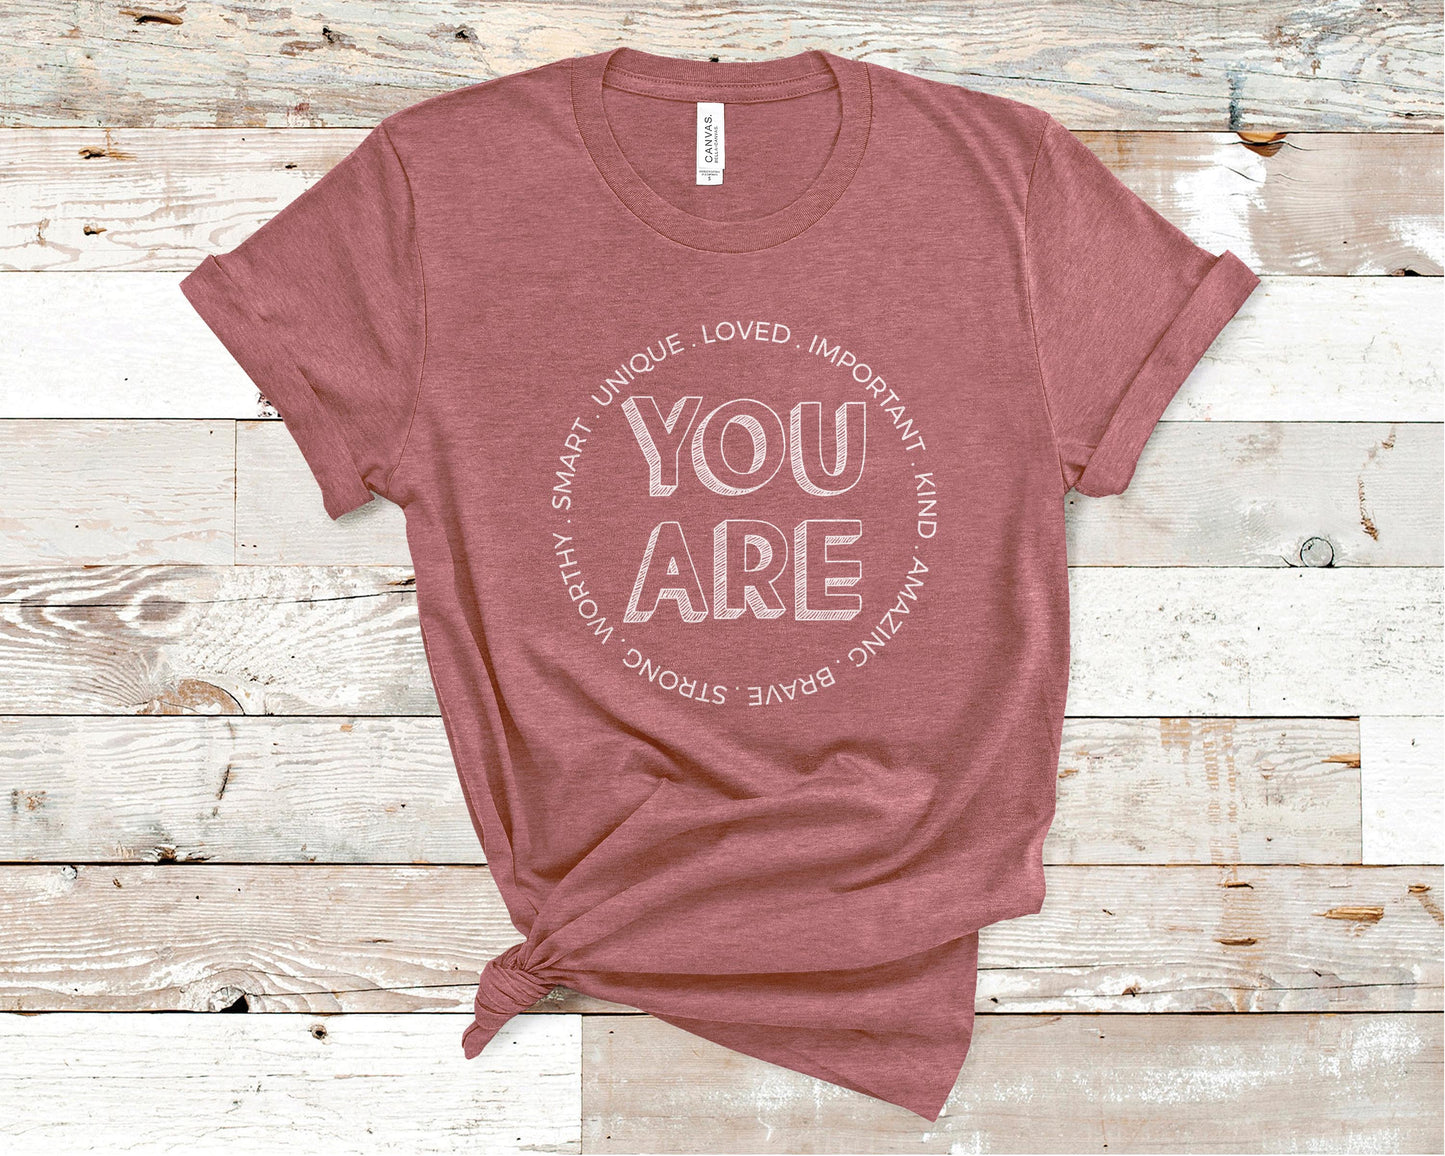 You Are - Inspiration